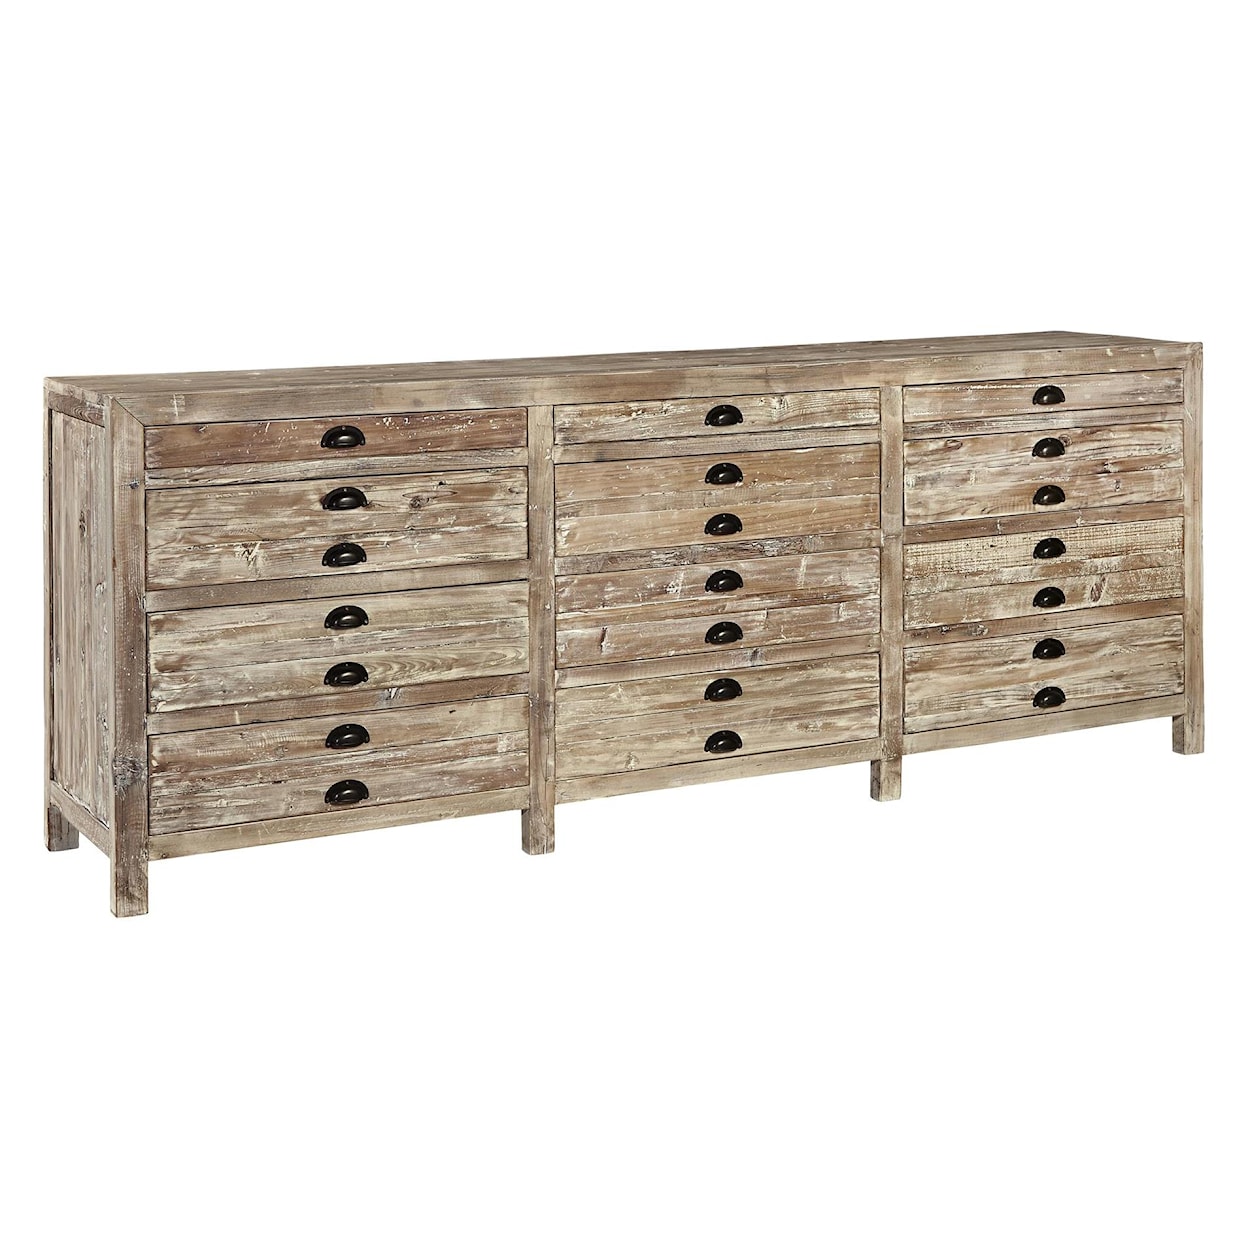 Furniture Classics Accents Apothecary Cabinet